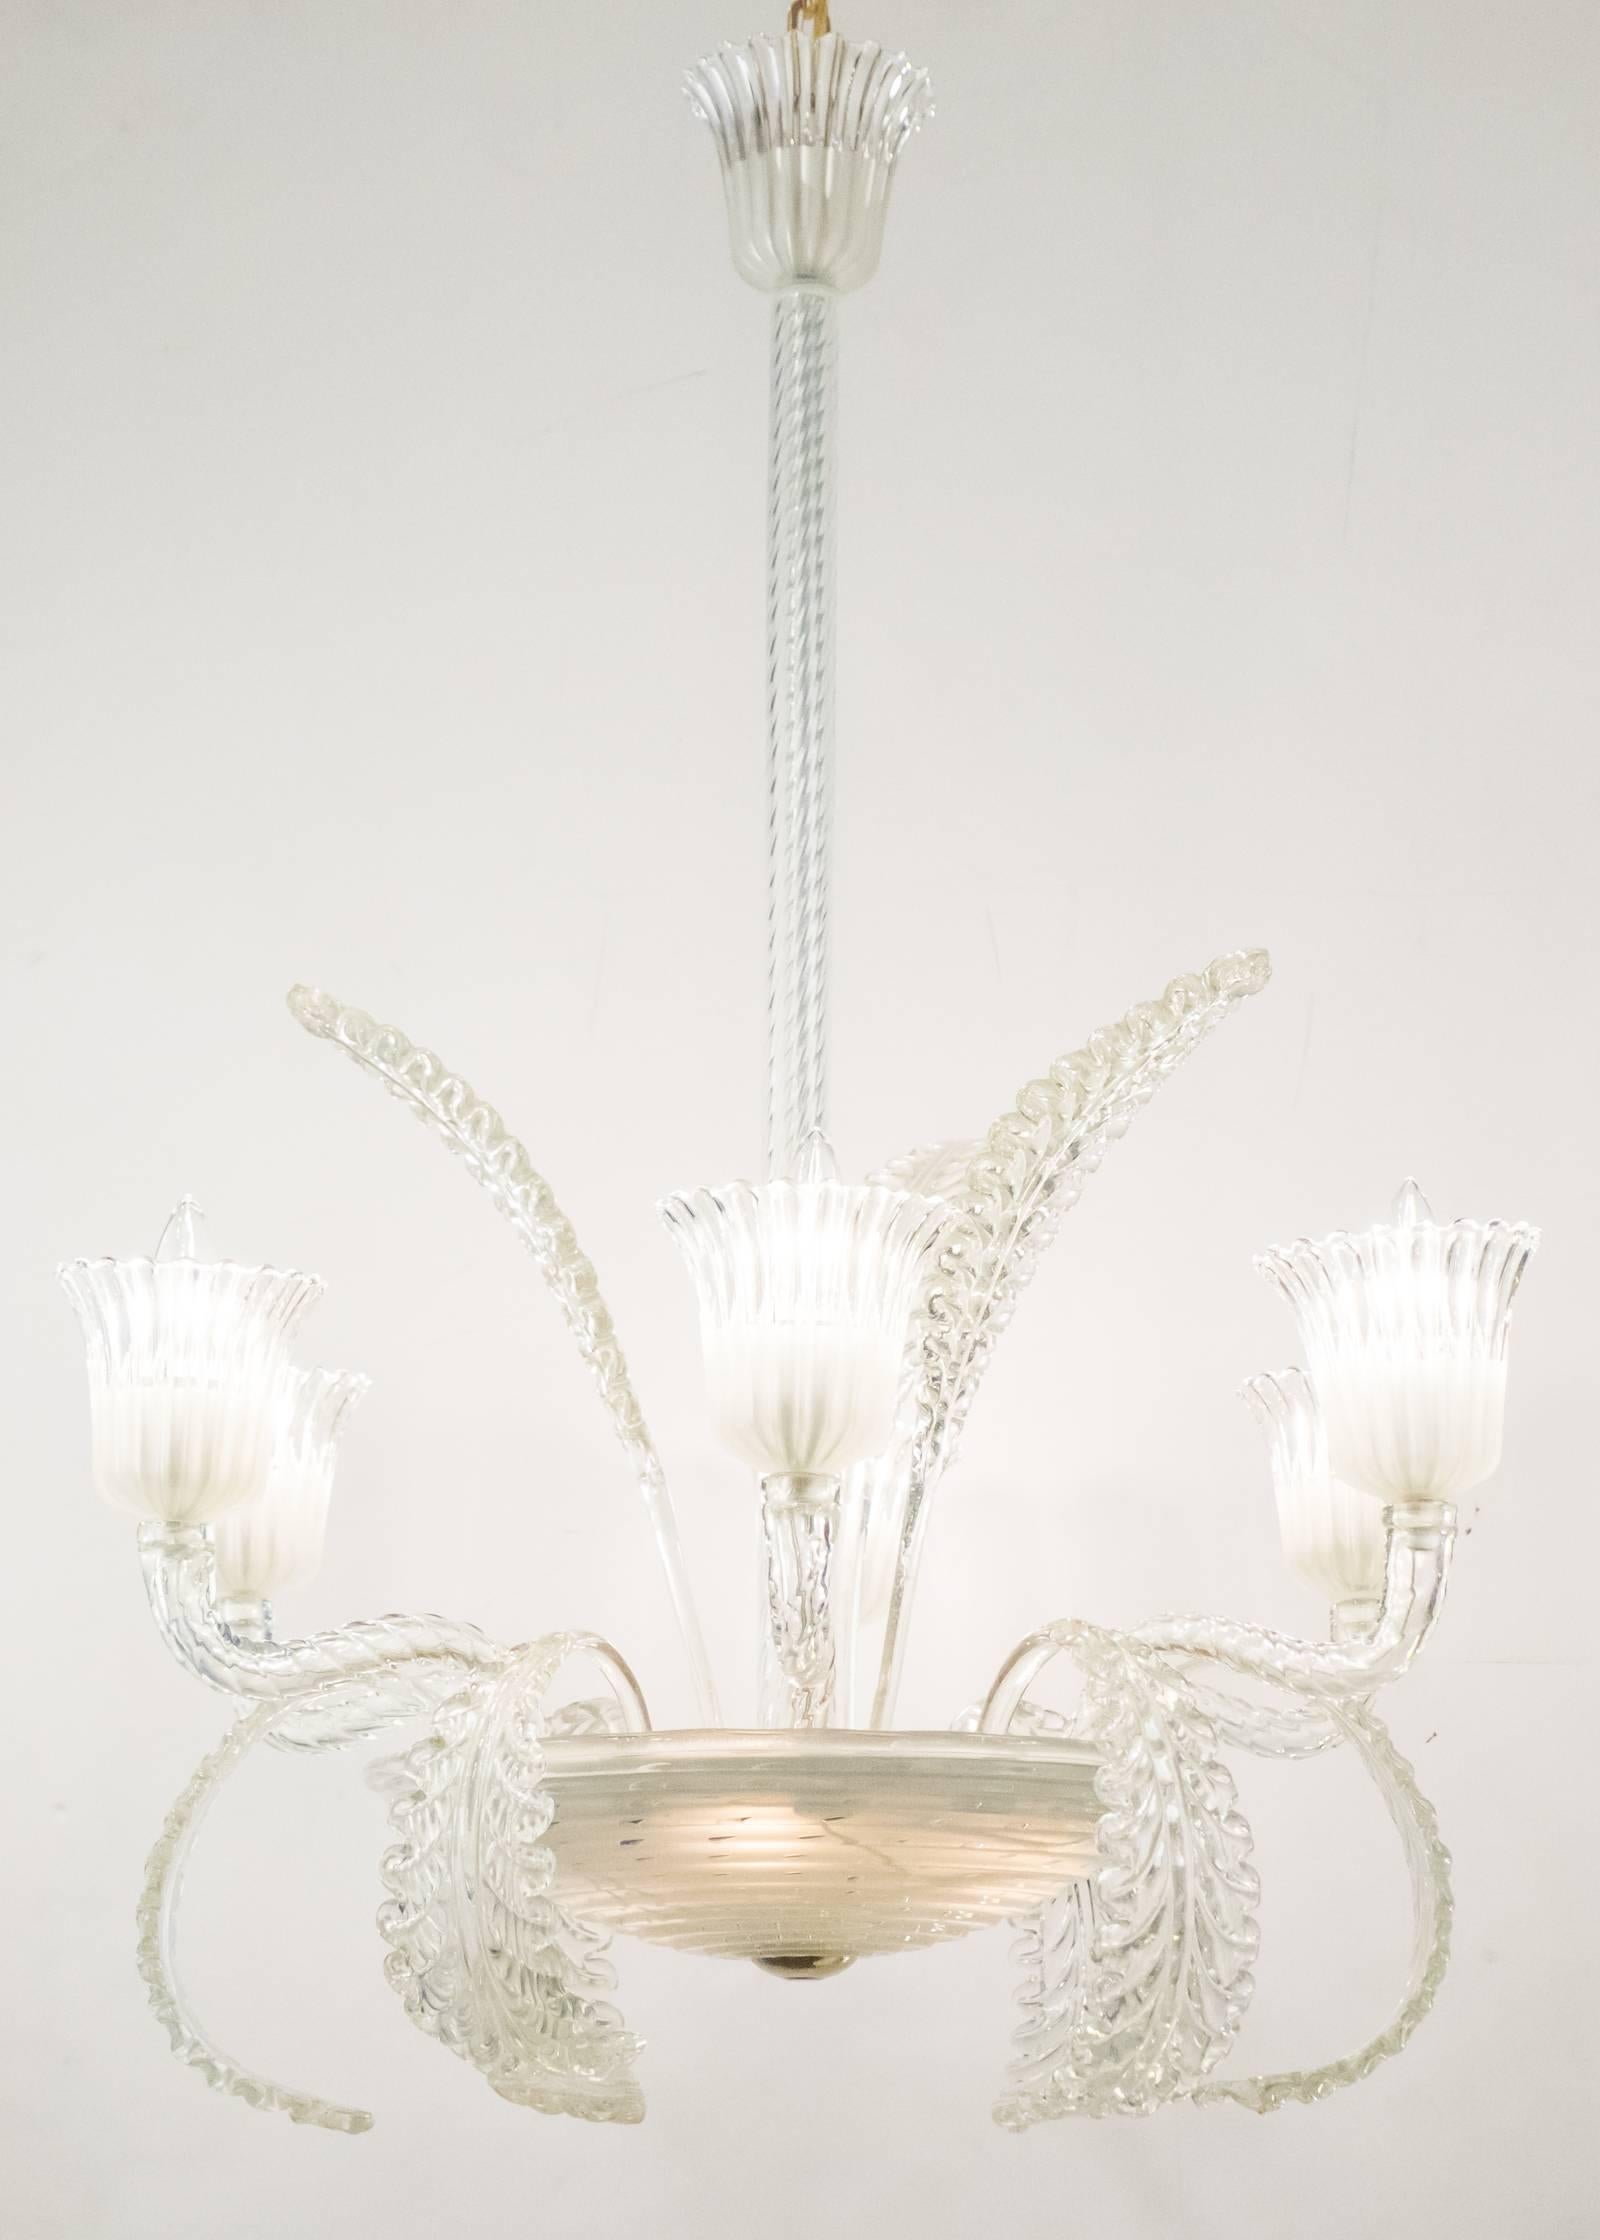 Italian Art Deco handblown Murano glass chandelier with six branches and nine curling leaves flowing from a central cup. Holds a total of nine candelabra base bulbs, rewired for the US. Height with included brass chain and canopy is 56 in.